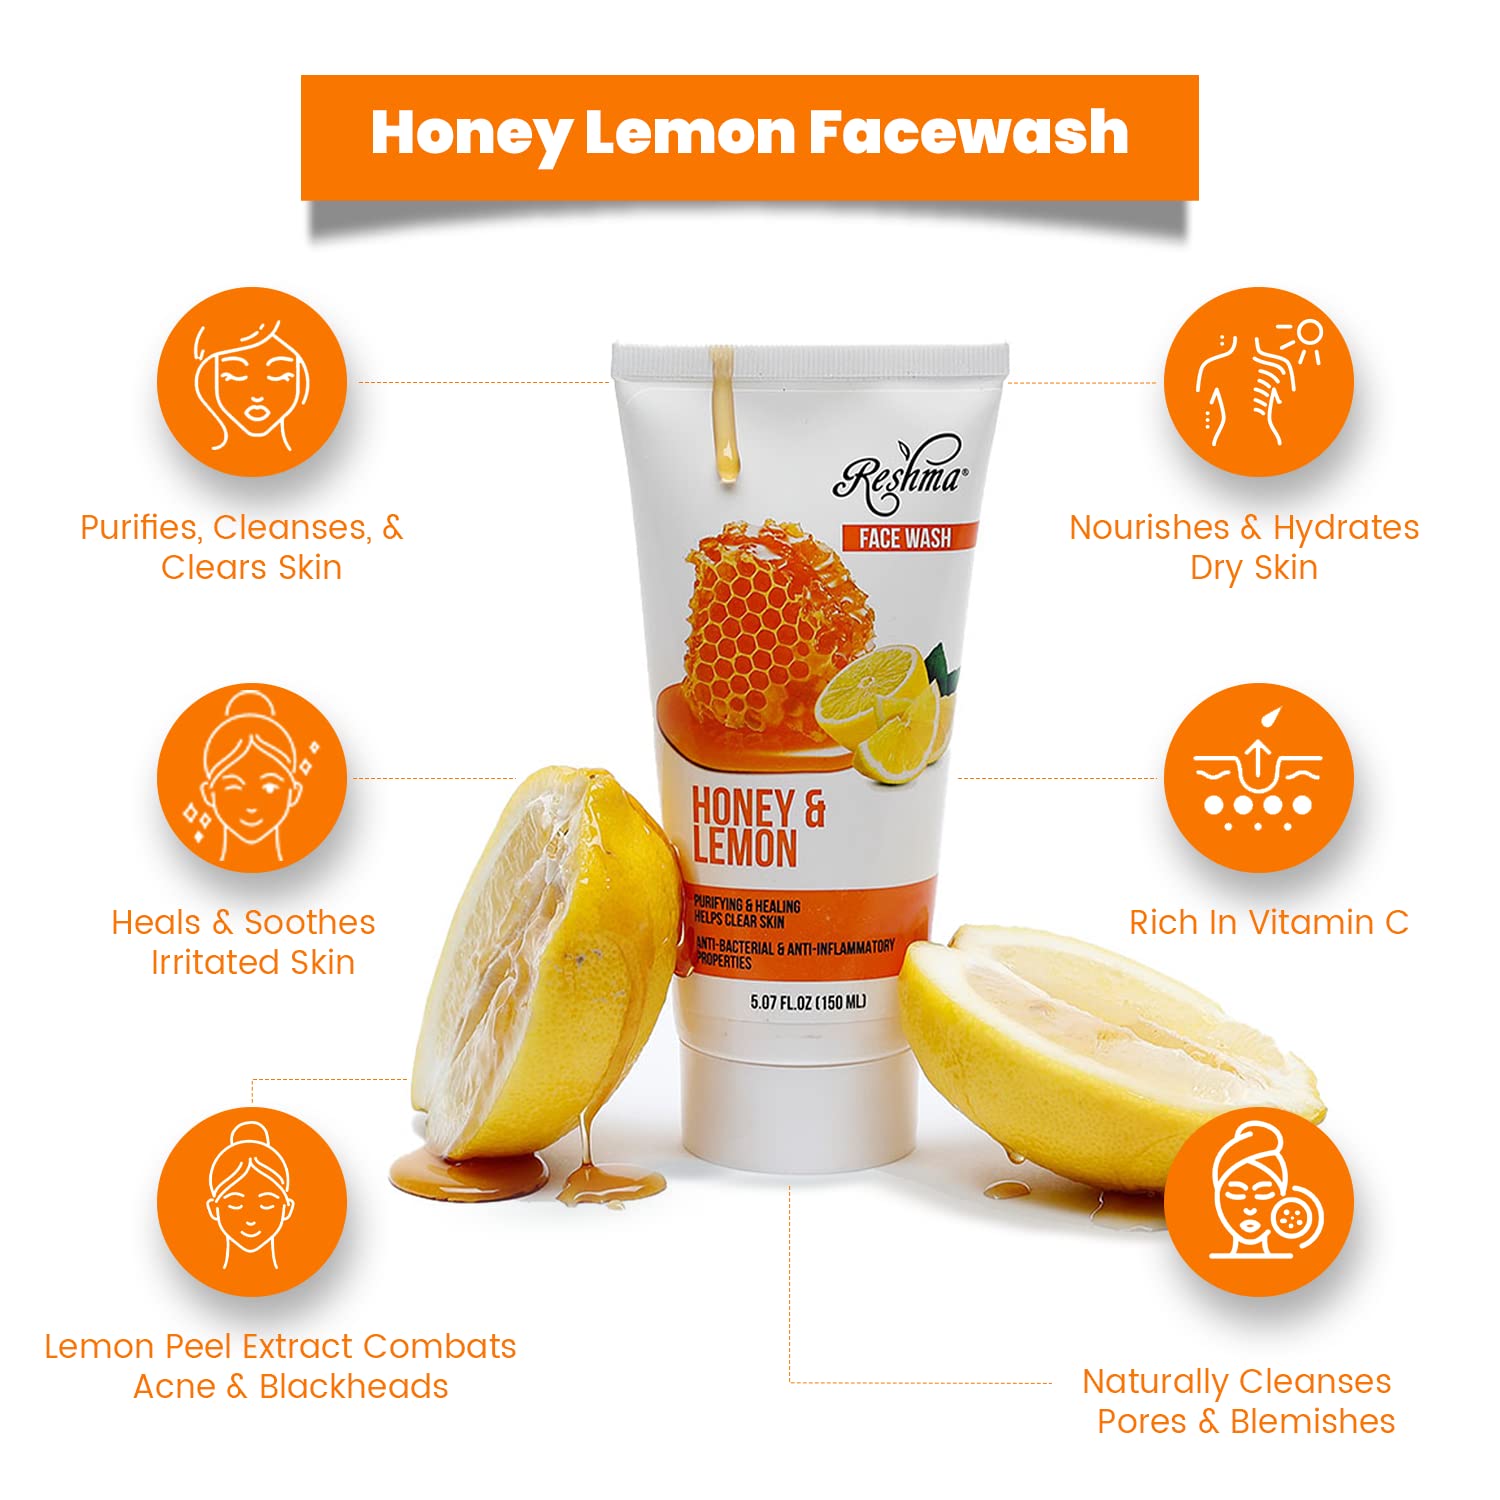 Reshma Beauty Honey & Lemon Face Wash Purifies, Nourishes, and Soothes to Naturally Cleanse Pores for Clear Skin Anti-Inflammatory Properties, Pack Of 1